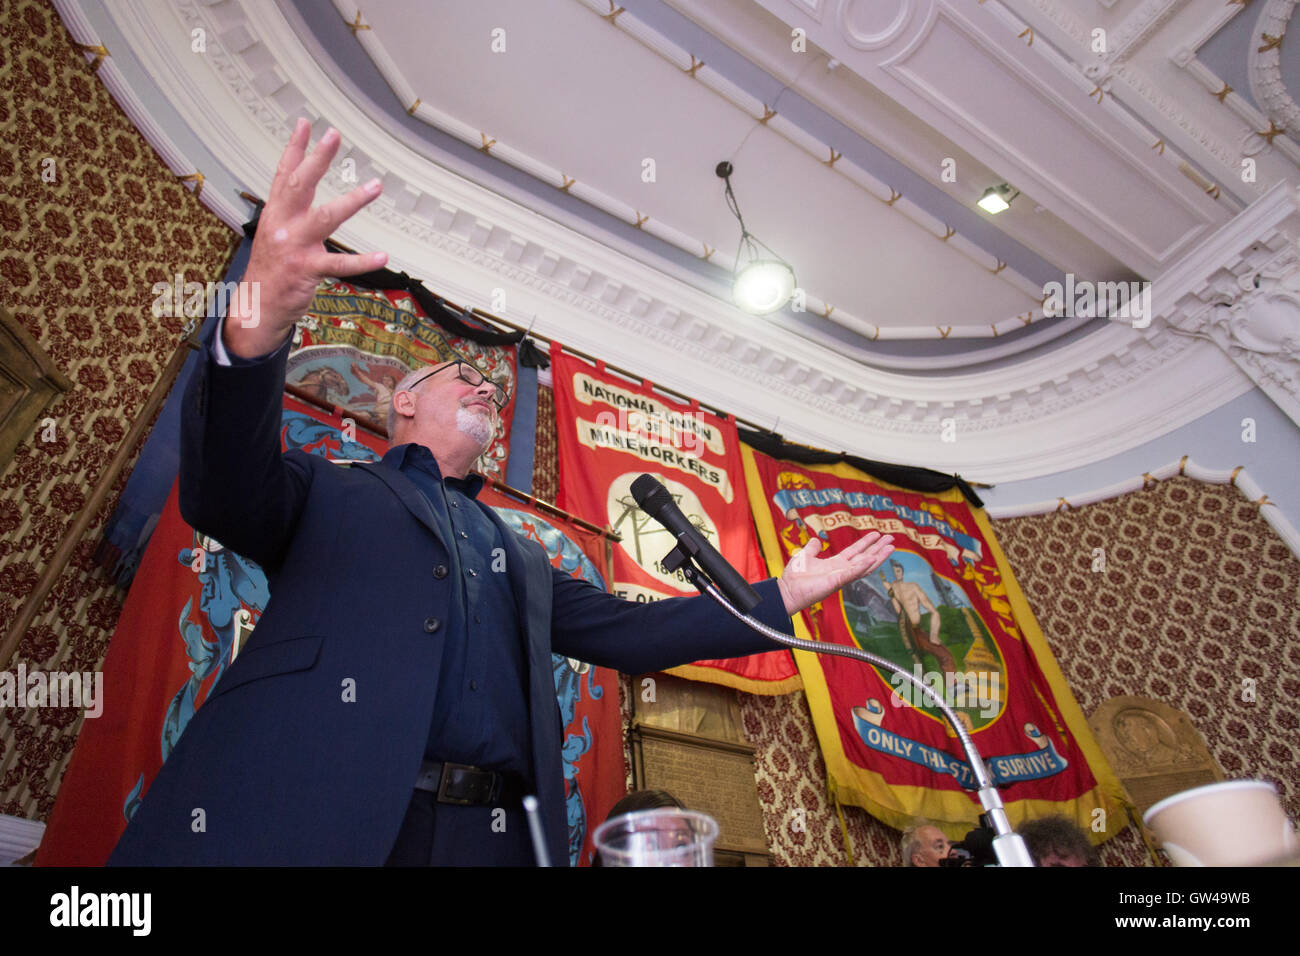 Jon Trickett, Labour politician and MP for Hemsworth, speaks at a rally, held at the National Union of Mineworkers, in Barnsley. Stock Photo